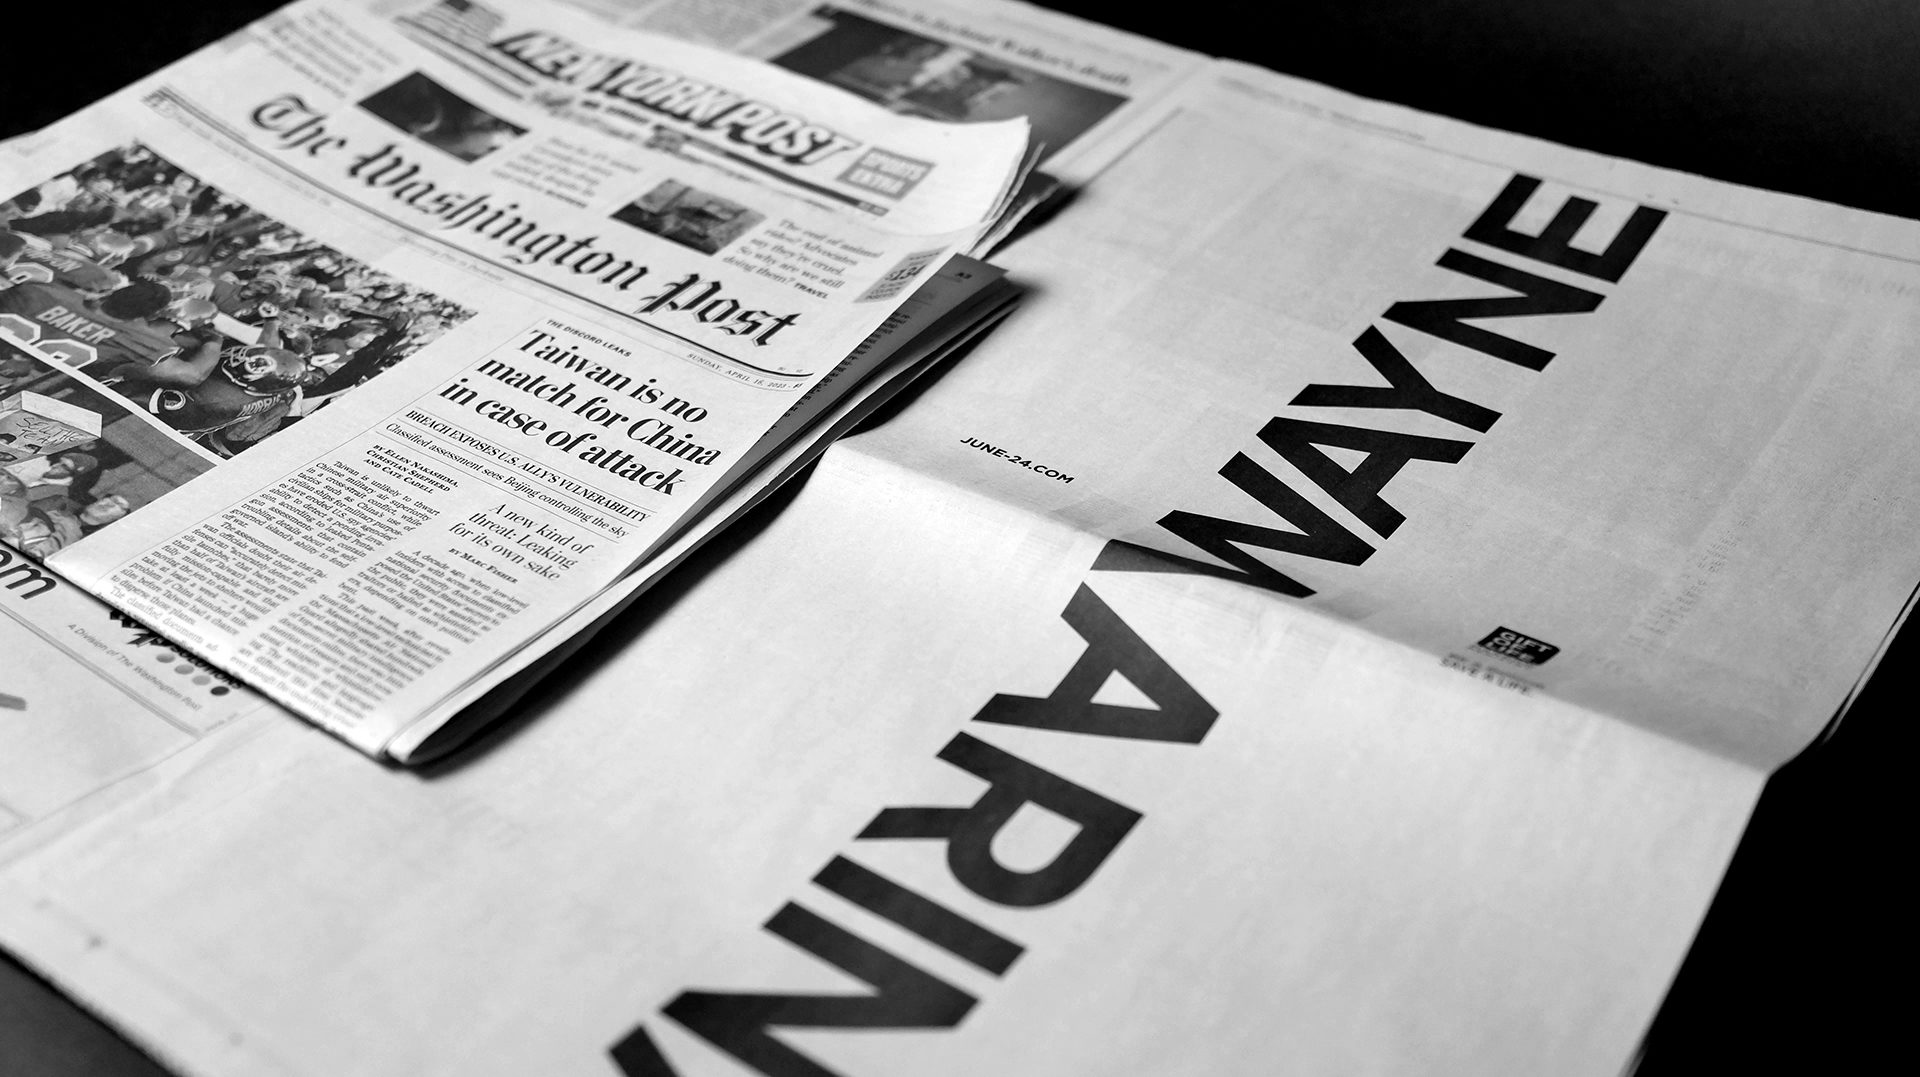 Photograph of a newspaper insert featuring the names Wayne and Marina joined in the middle by the letters 'M' and 'W'